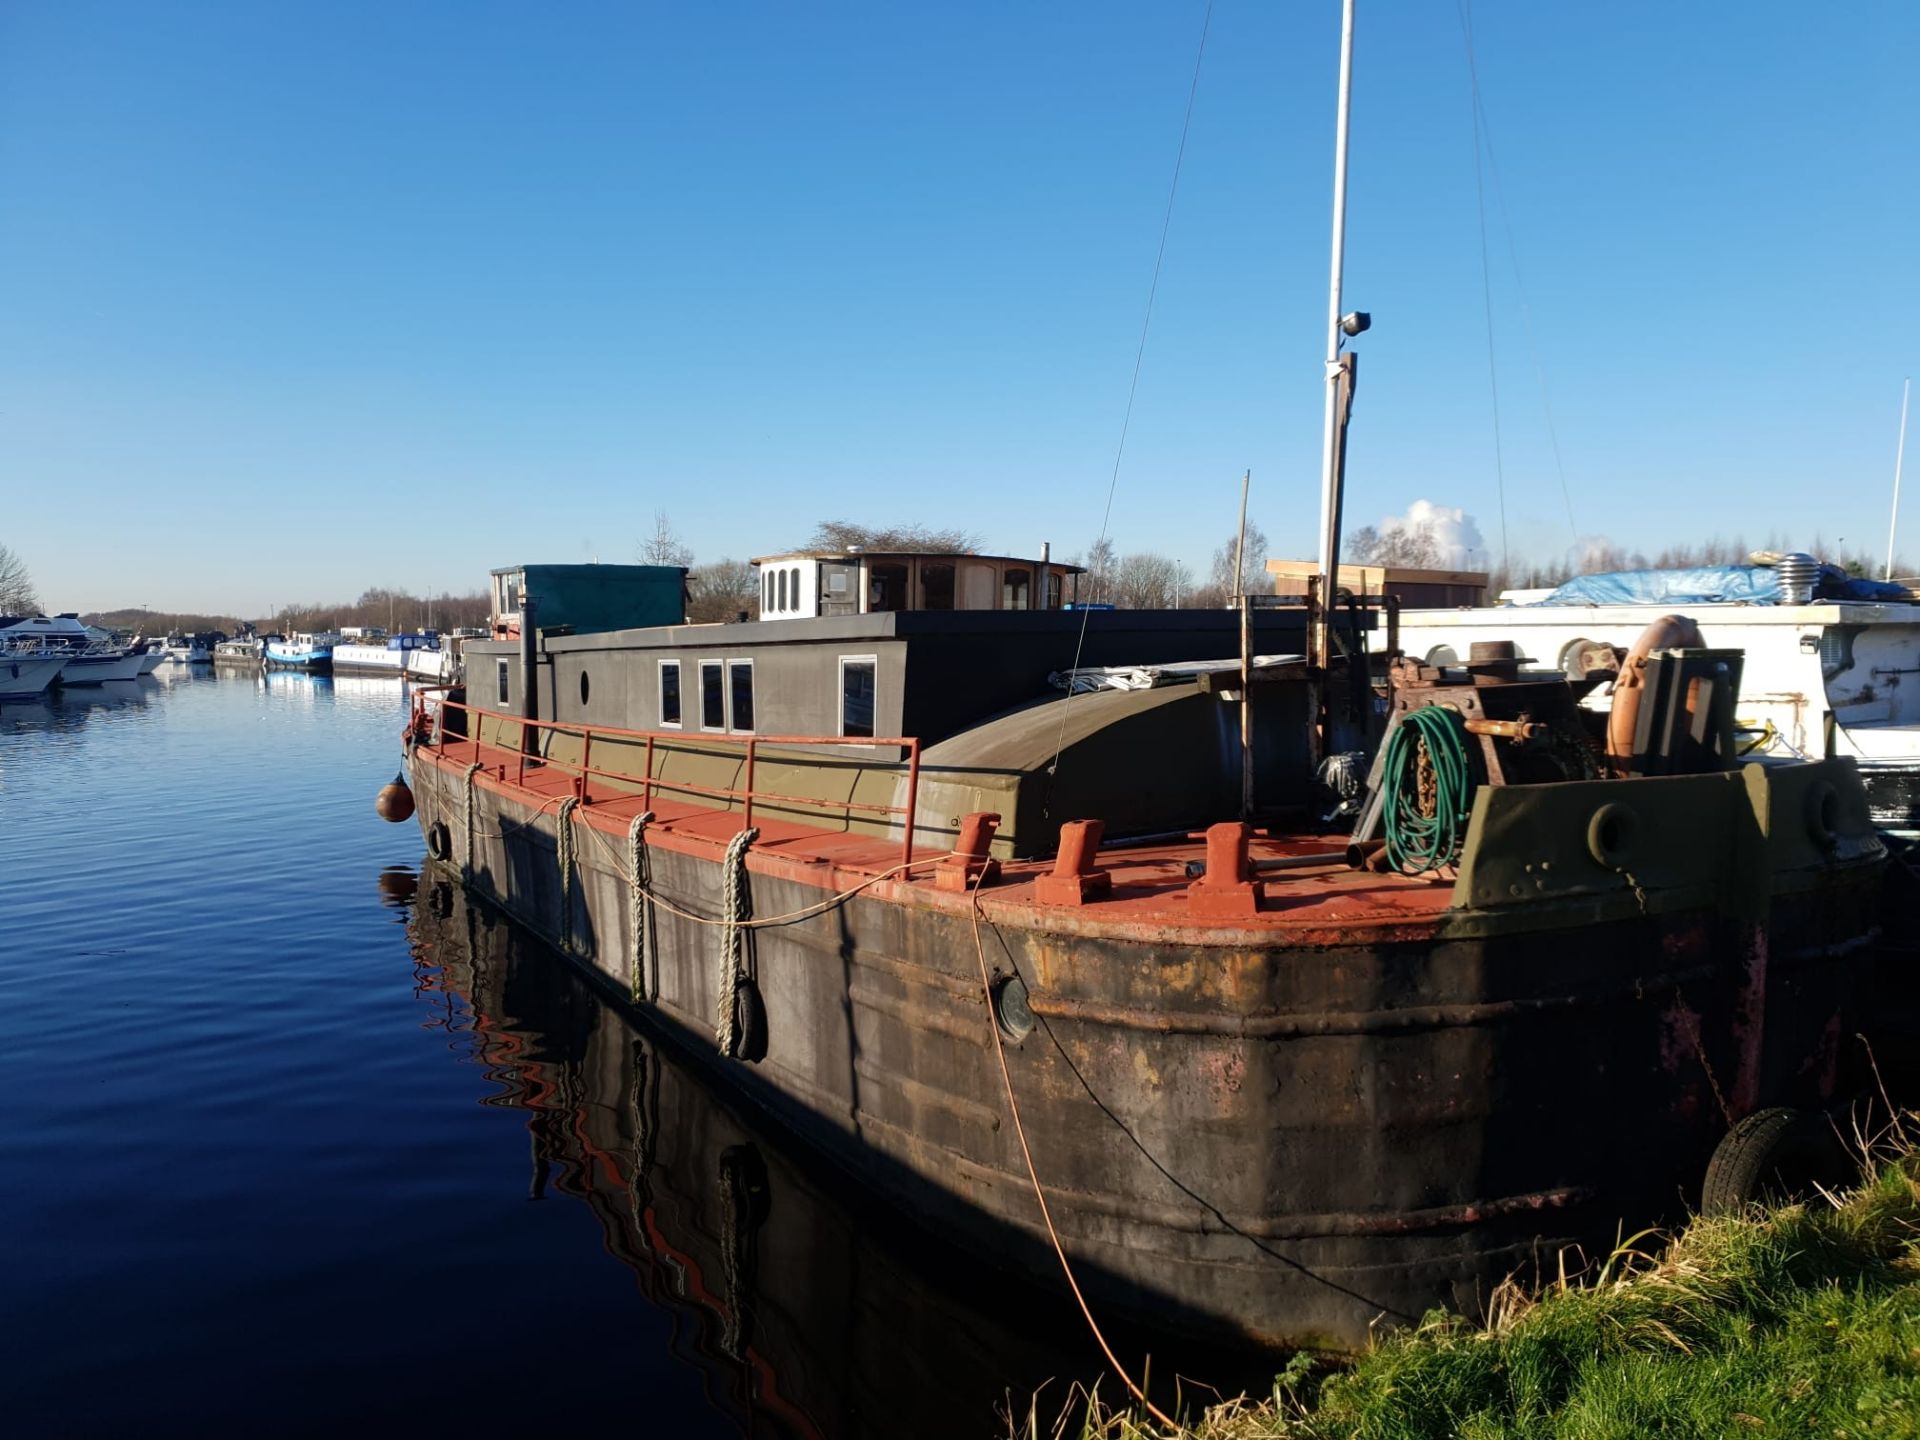 c.1939 liveaboard barge, "Fidelity". Cat D waterways. 57' 6" x 14' 2" approximately. Lister JP2